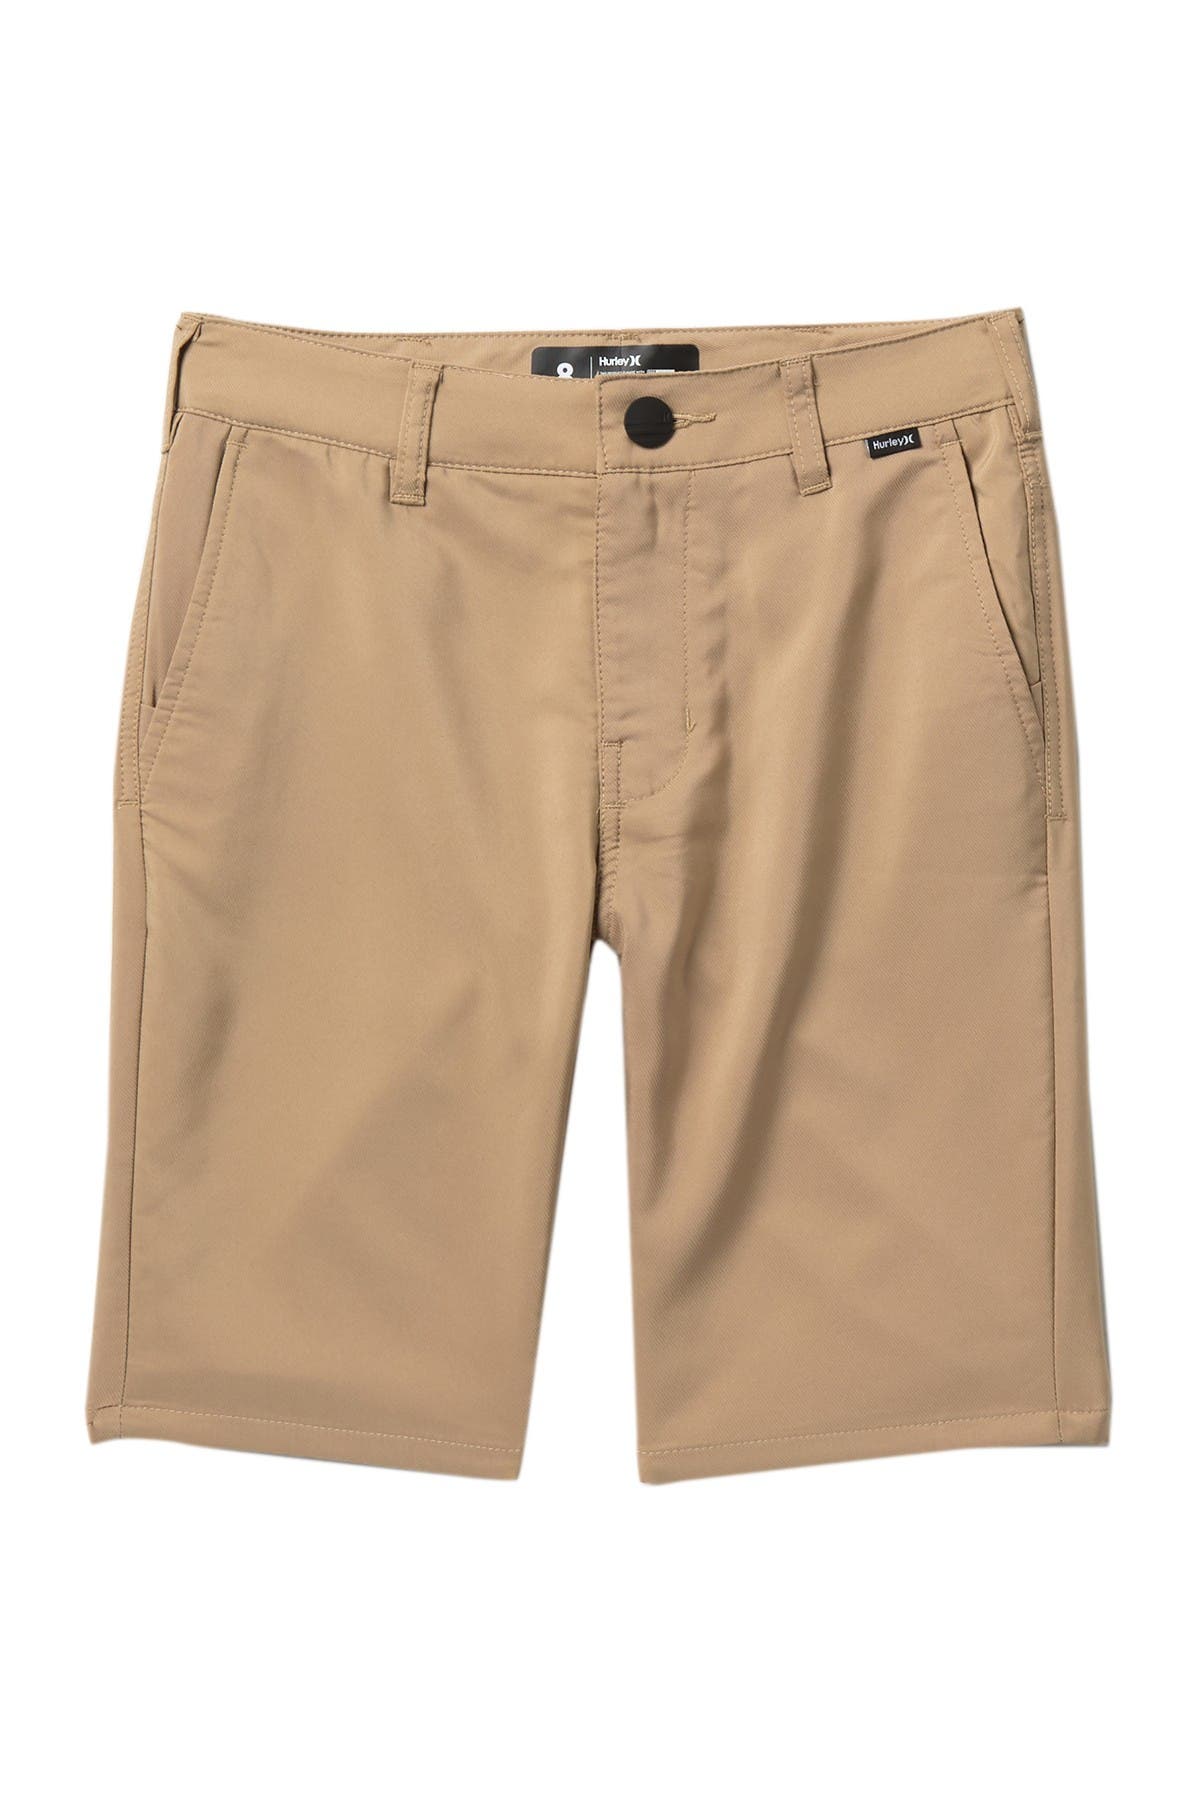 Hurley Kids' Dri-fit Chino Short In X1tcement